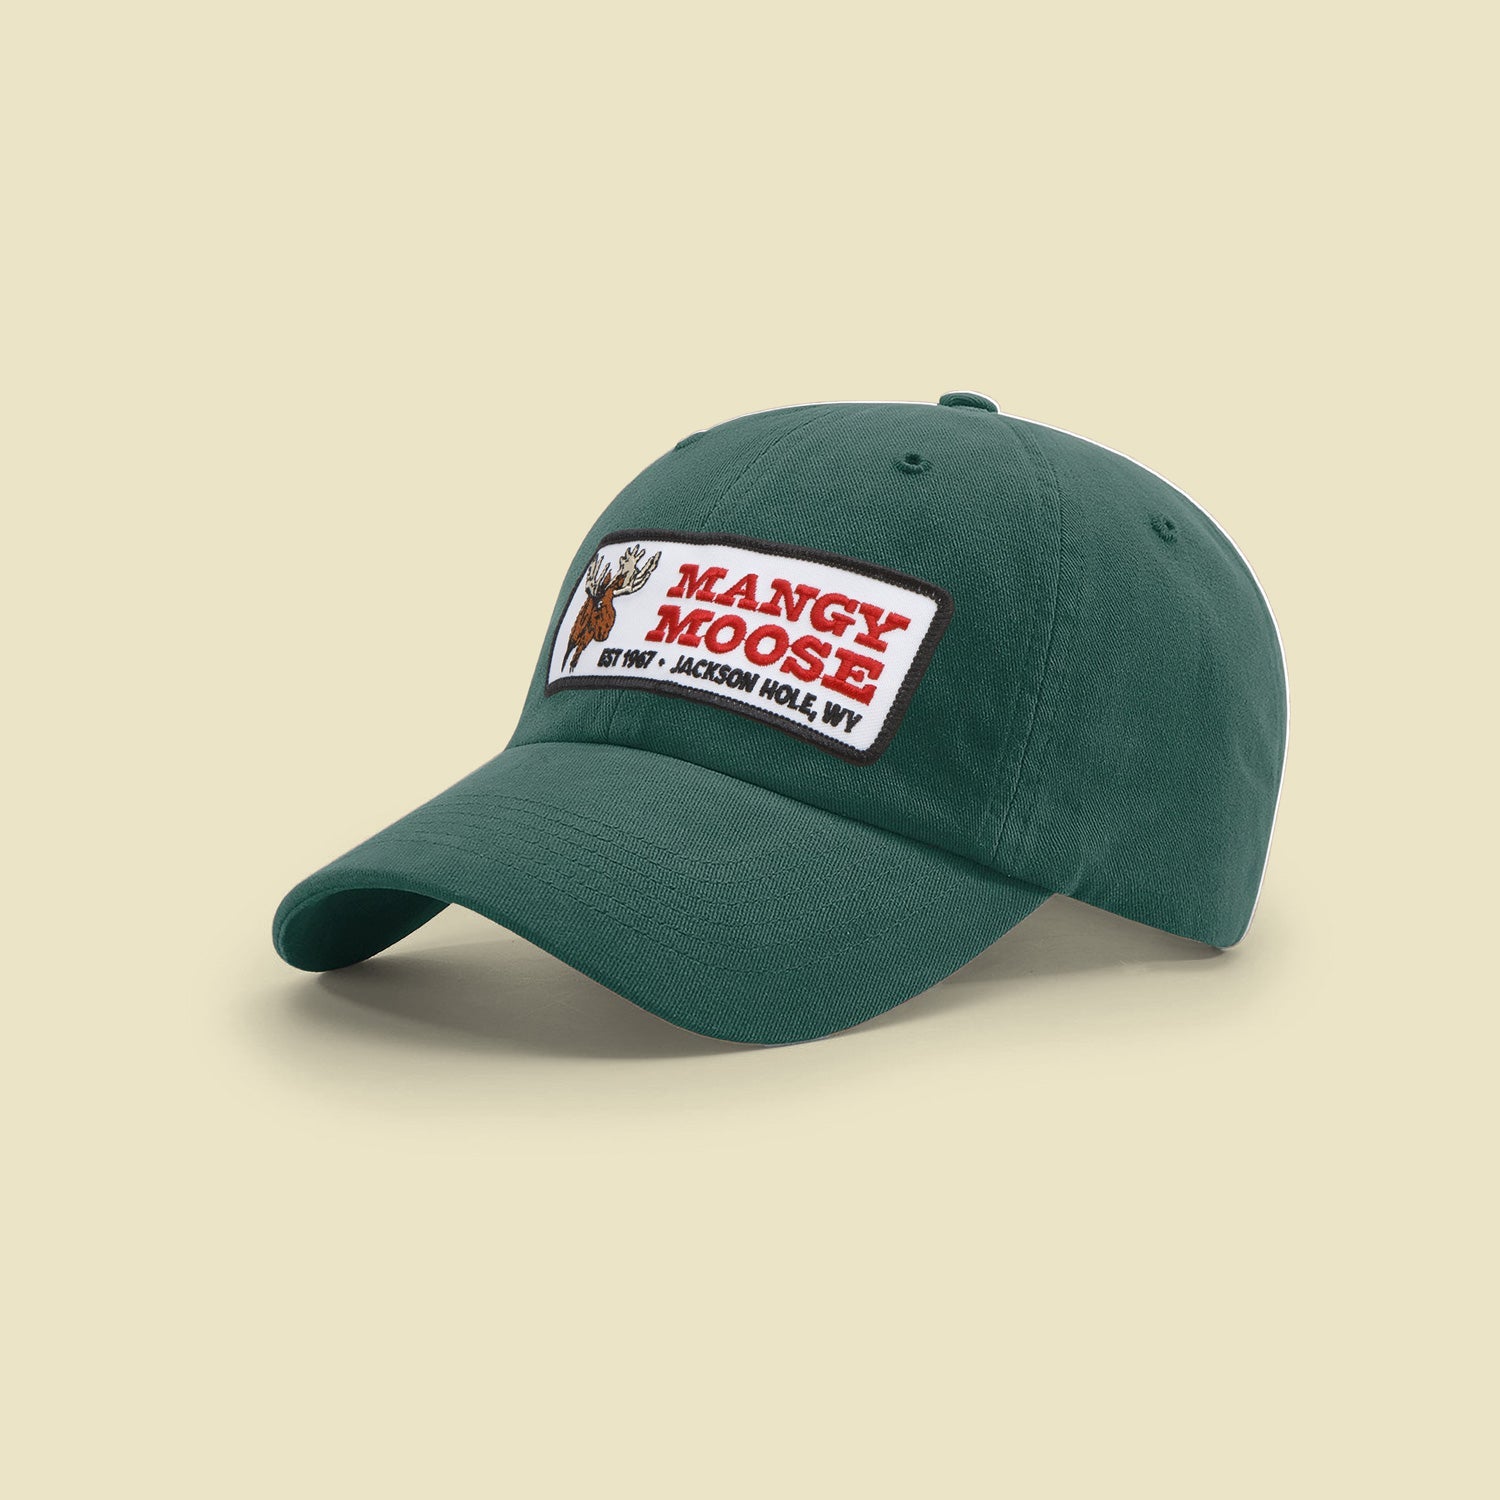 Manny Garment Washed Dad Hat - The Mangy Moose